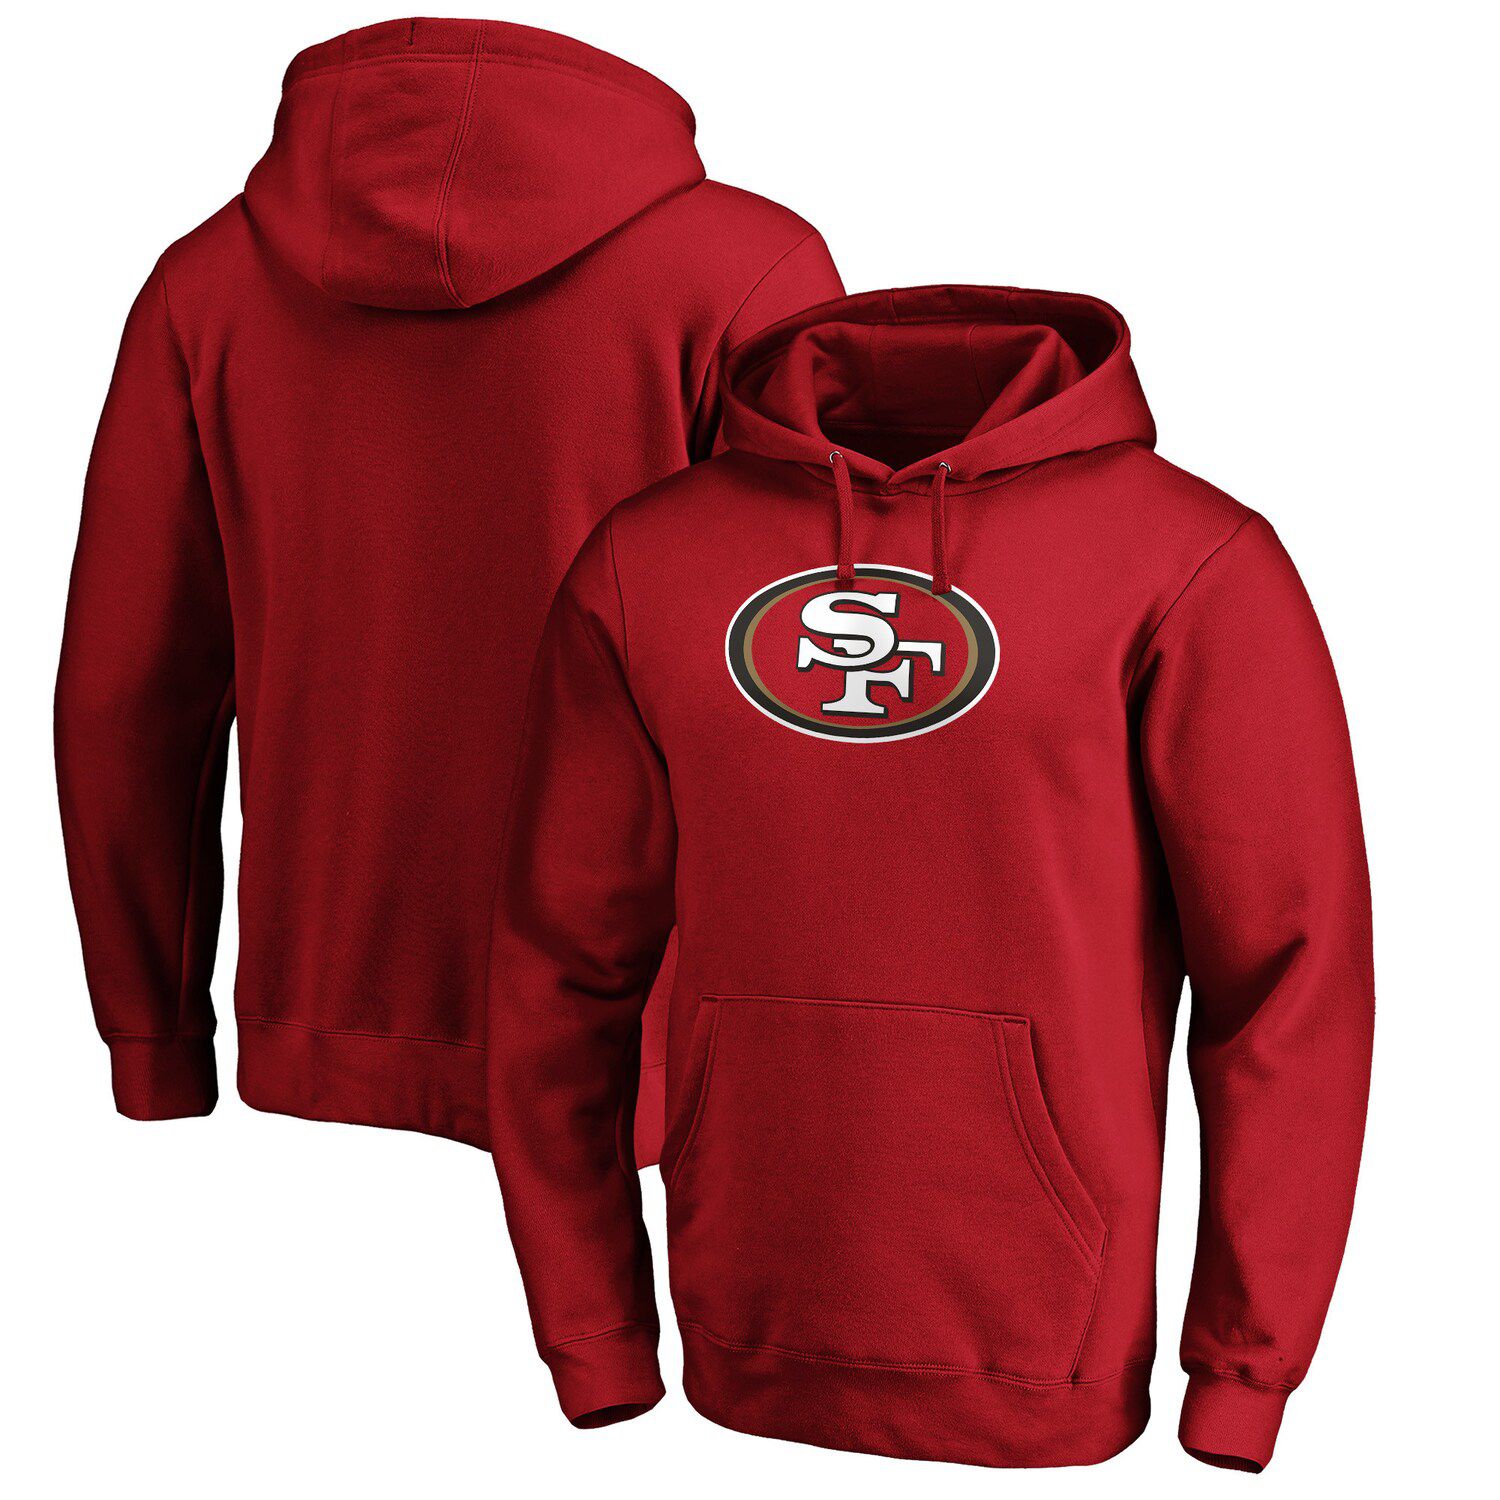 49ers gear for sale